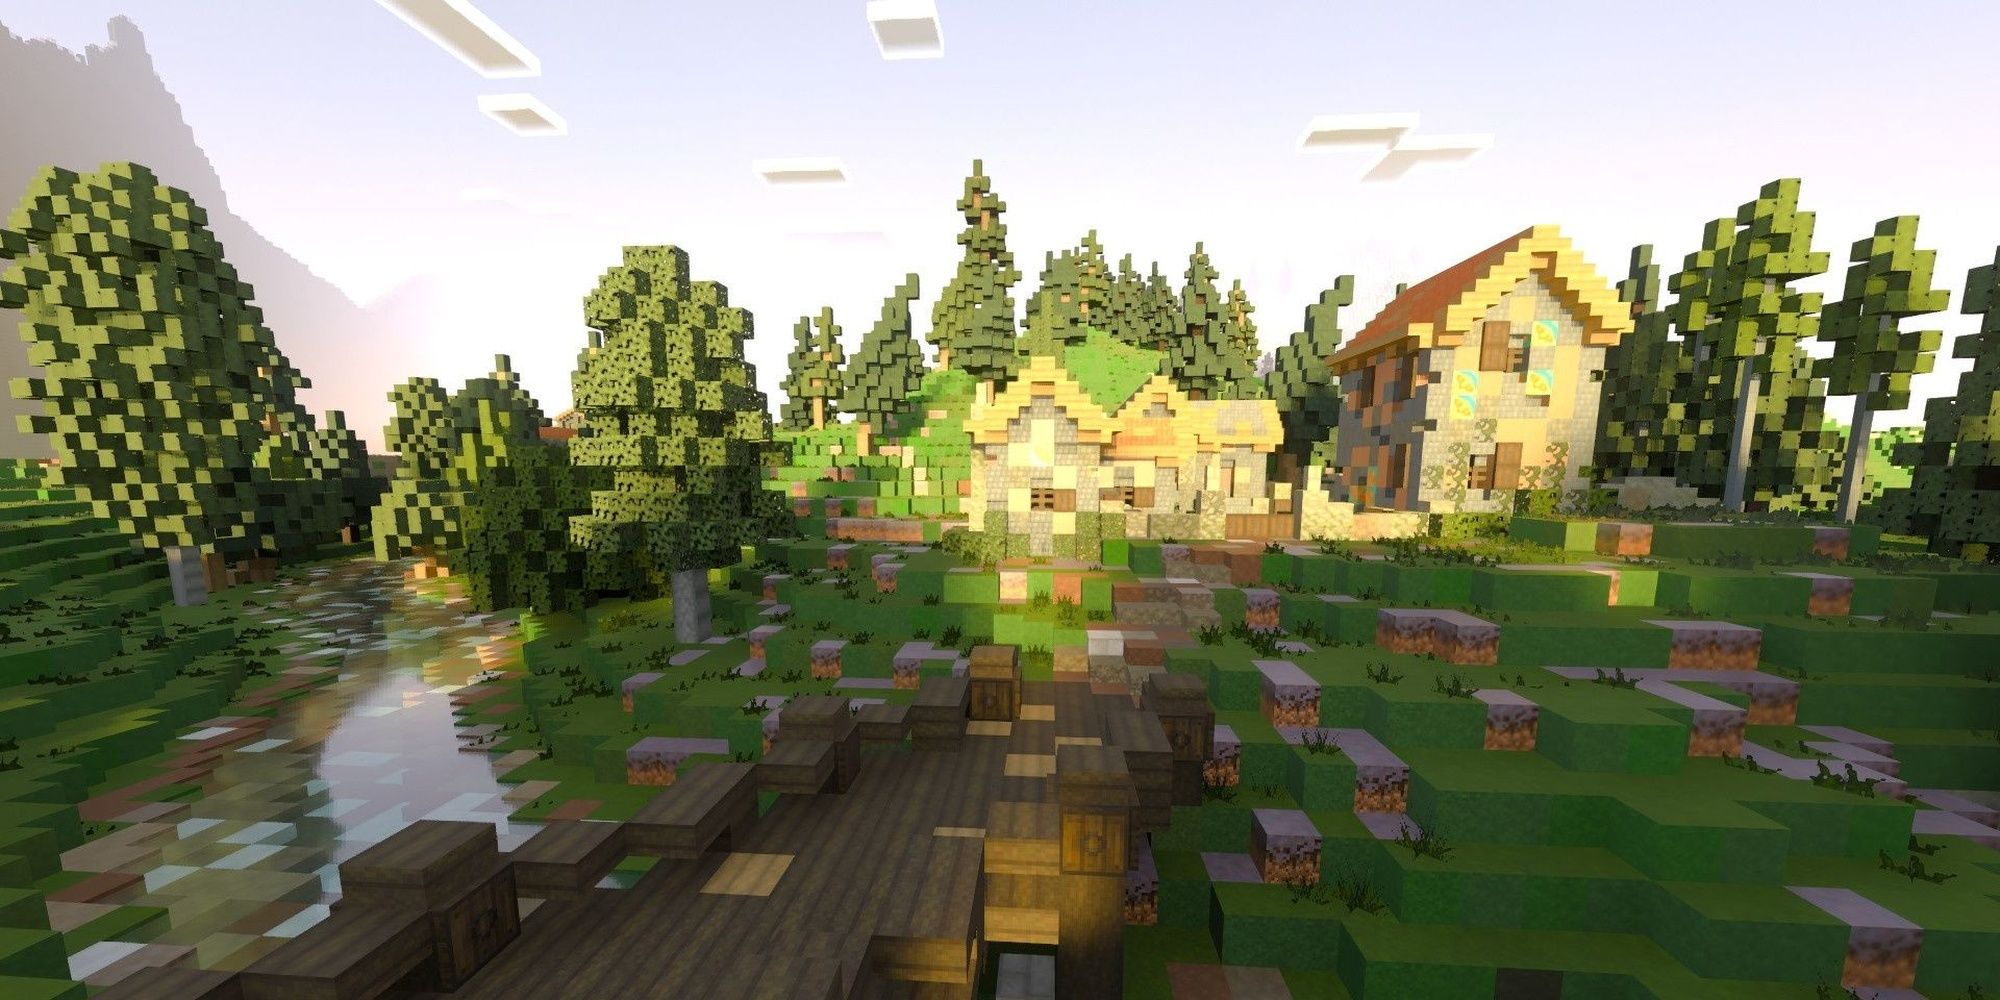 Minecraft with RTX on